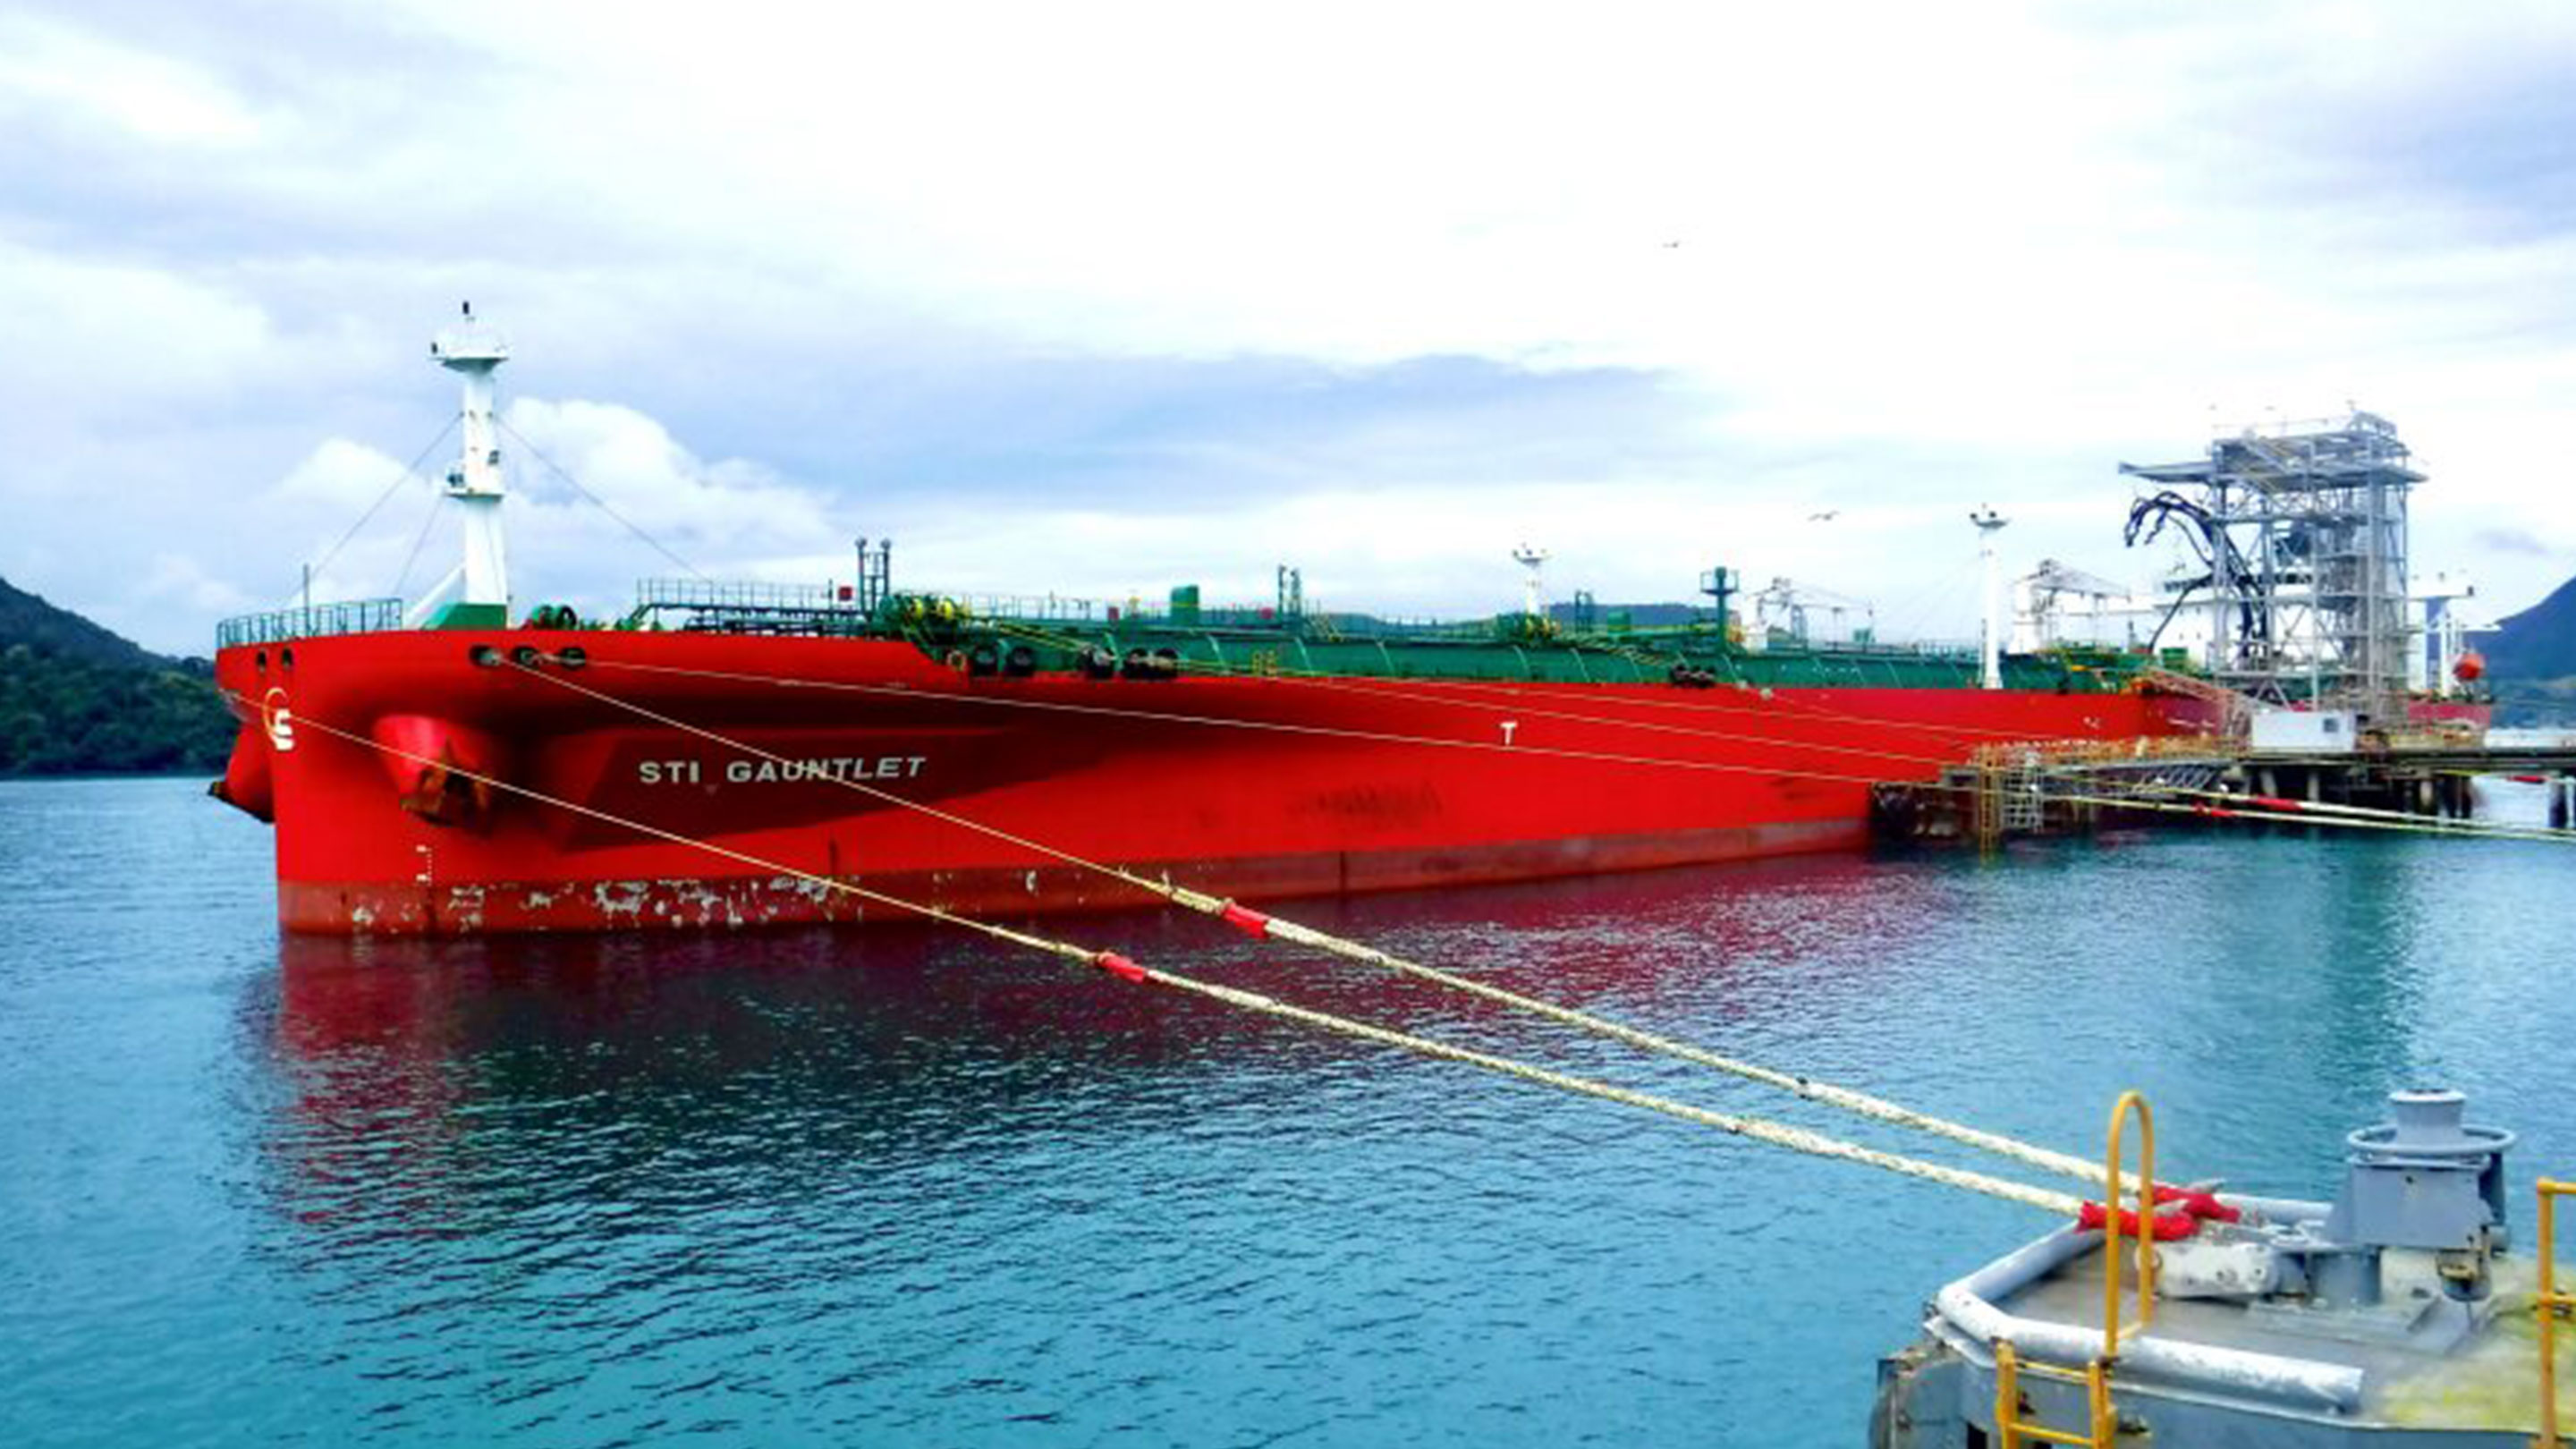 Mobil successfully delivers the largest ever fuel cargo to Marsden Point terminal